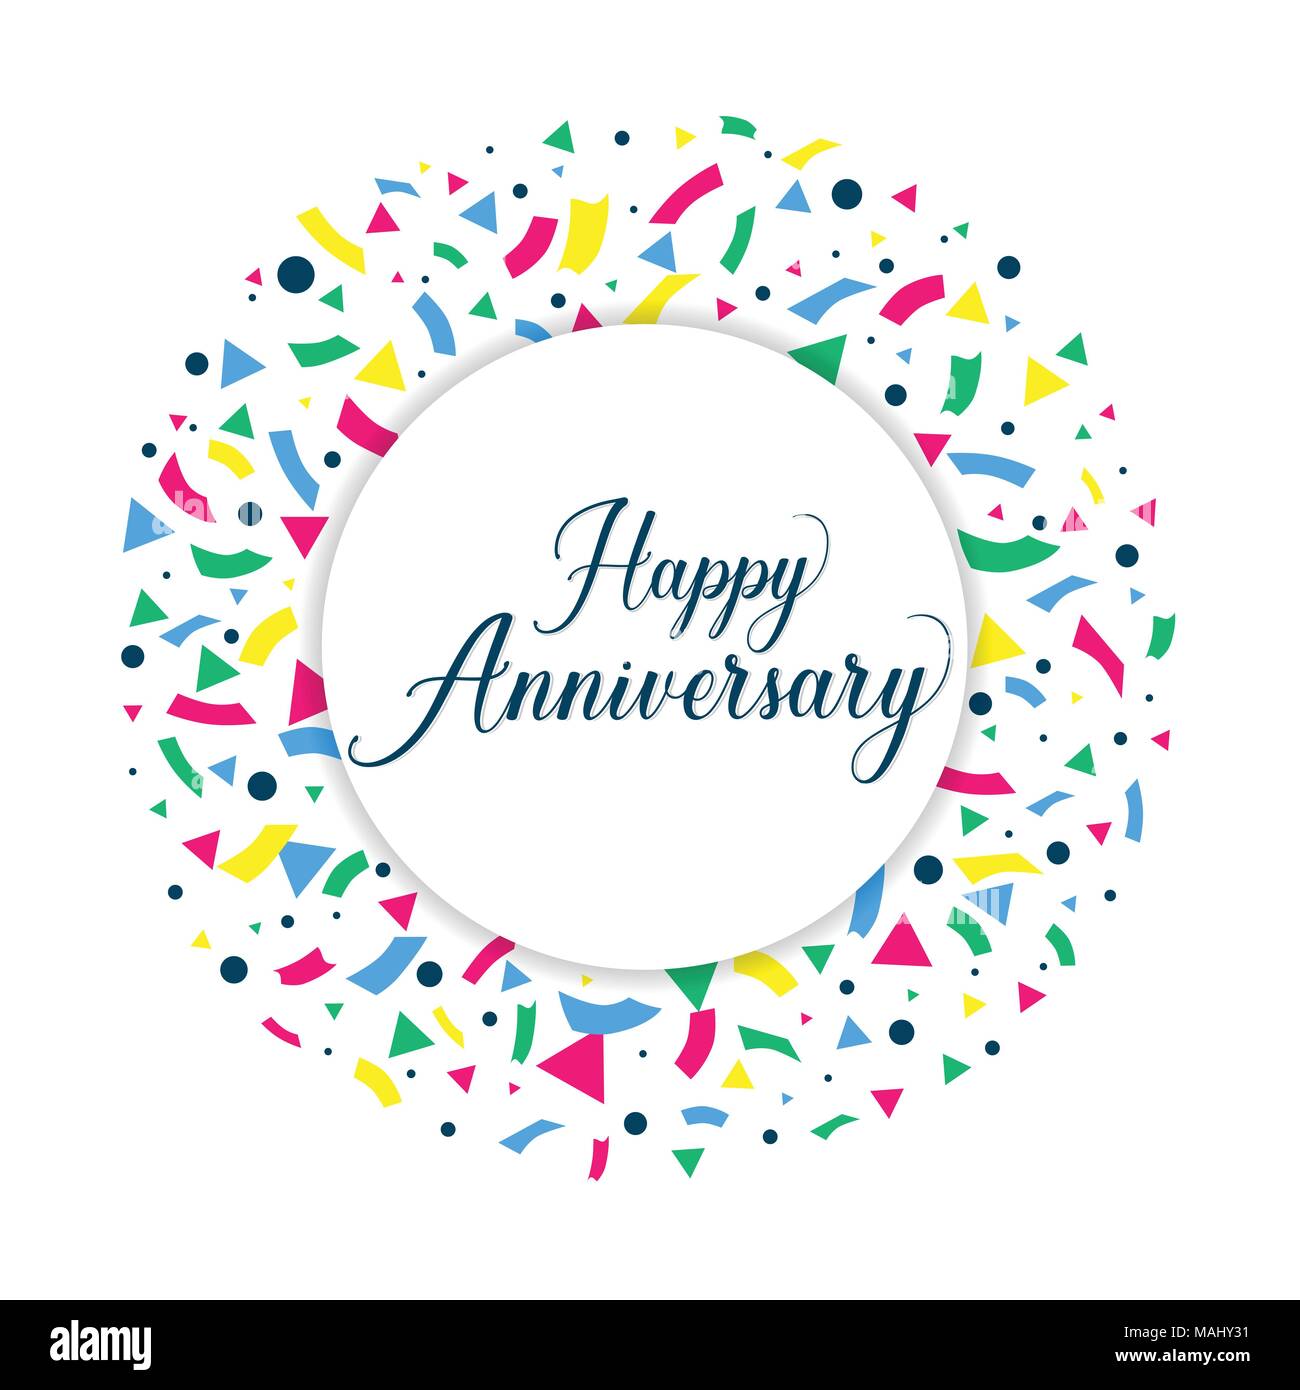 Happy anniversary background. Design for booklet, leaflet, magazine, brochure poster, web, invitation or greeting card. Vector illustration. Stock Vector